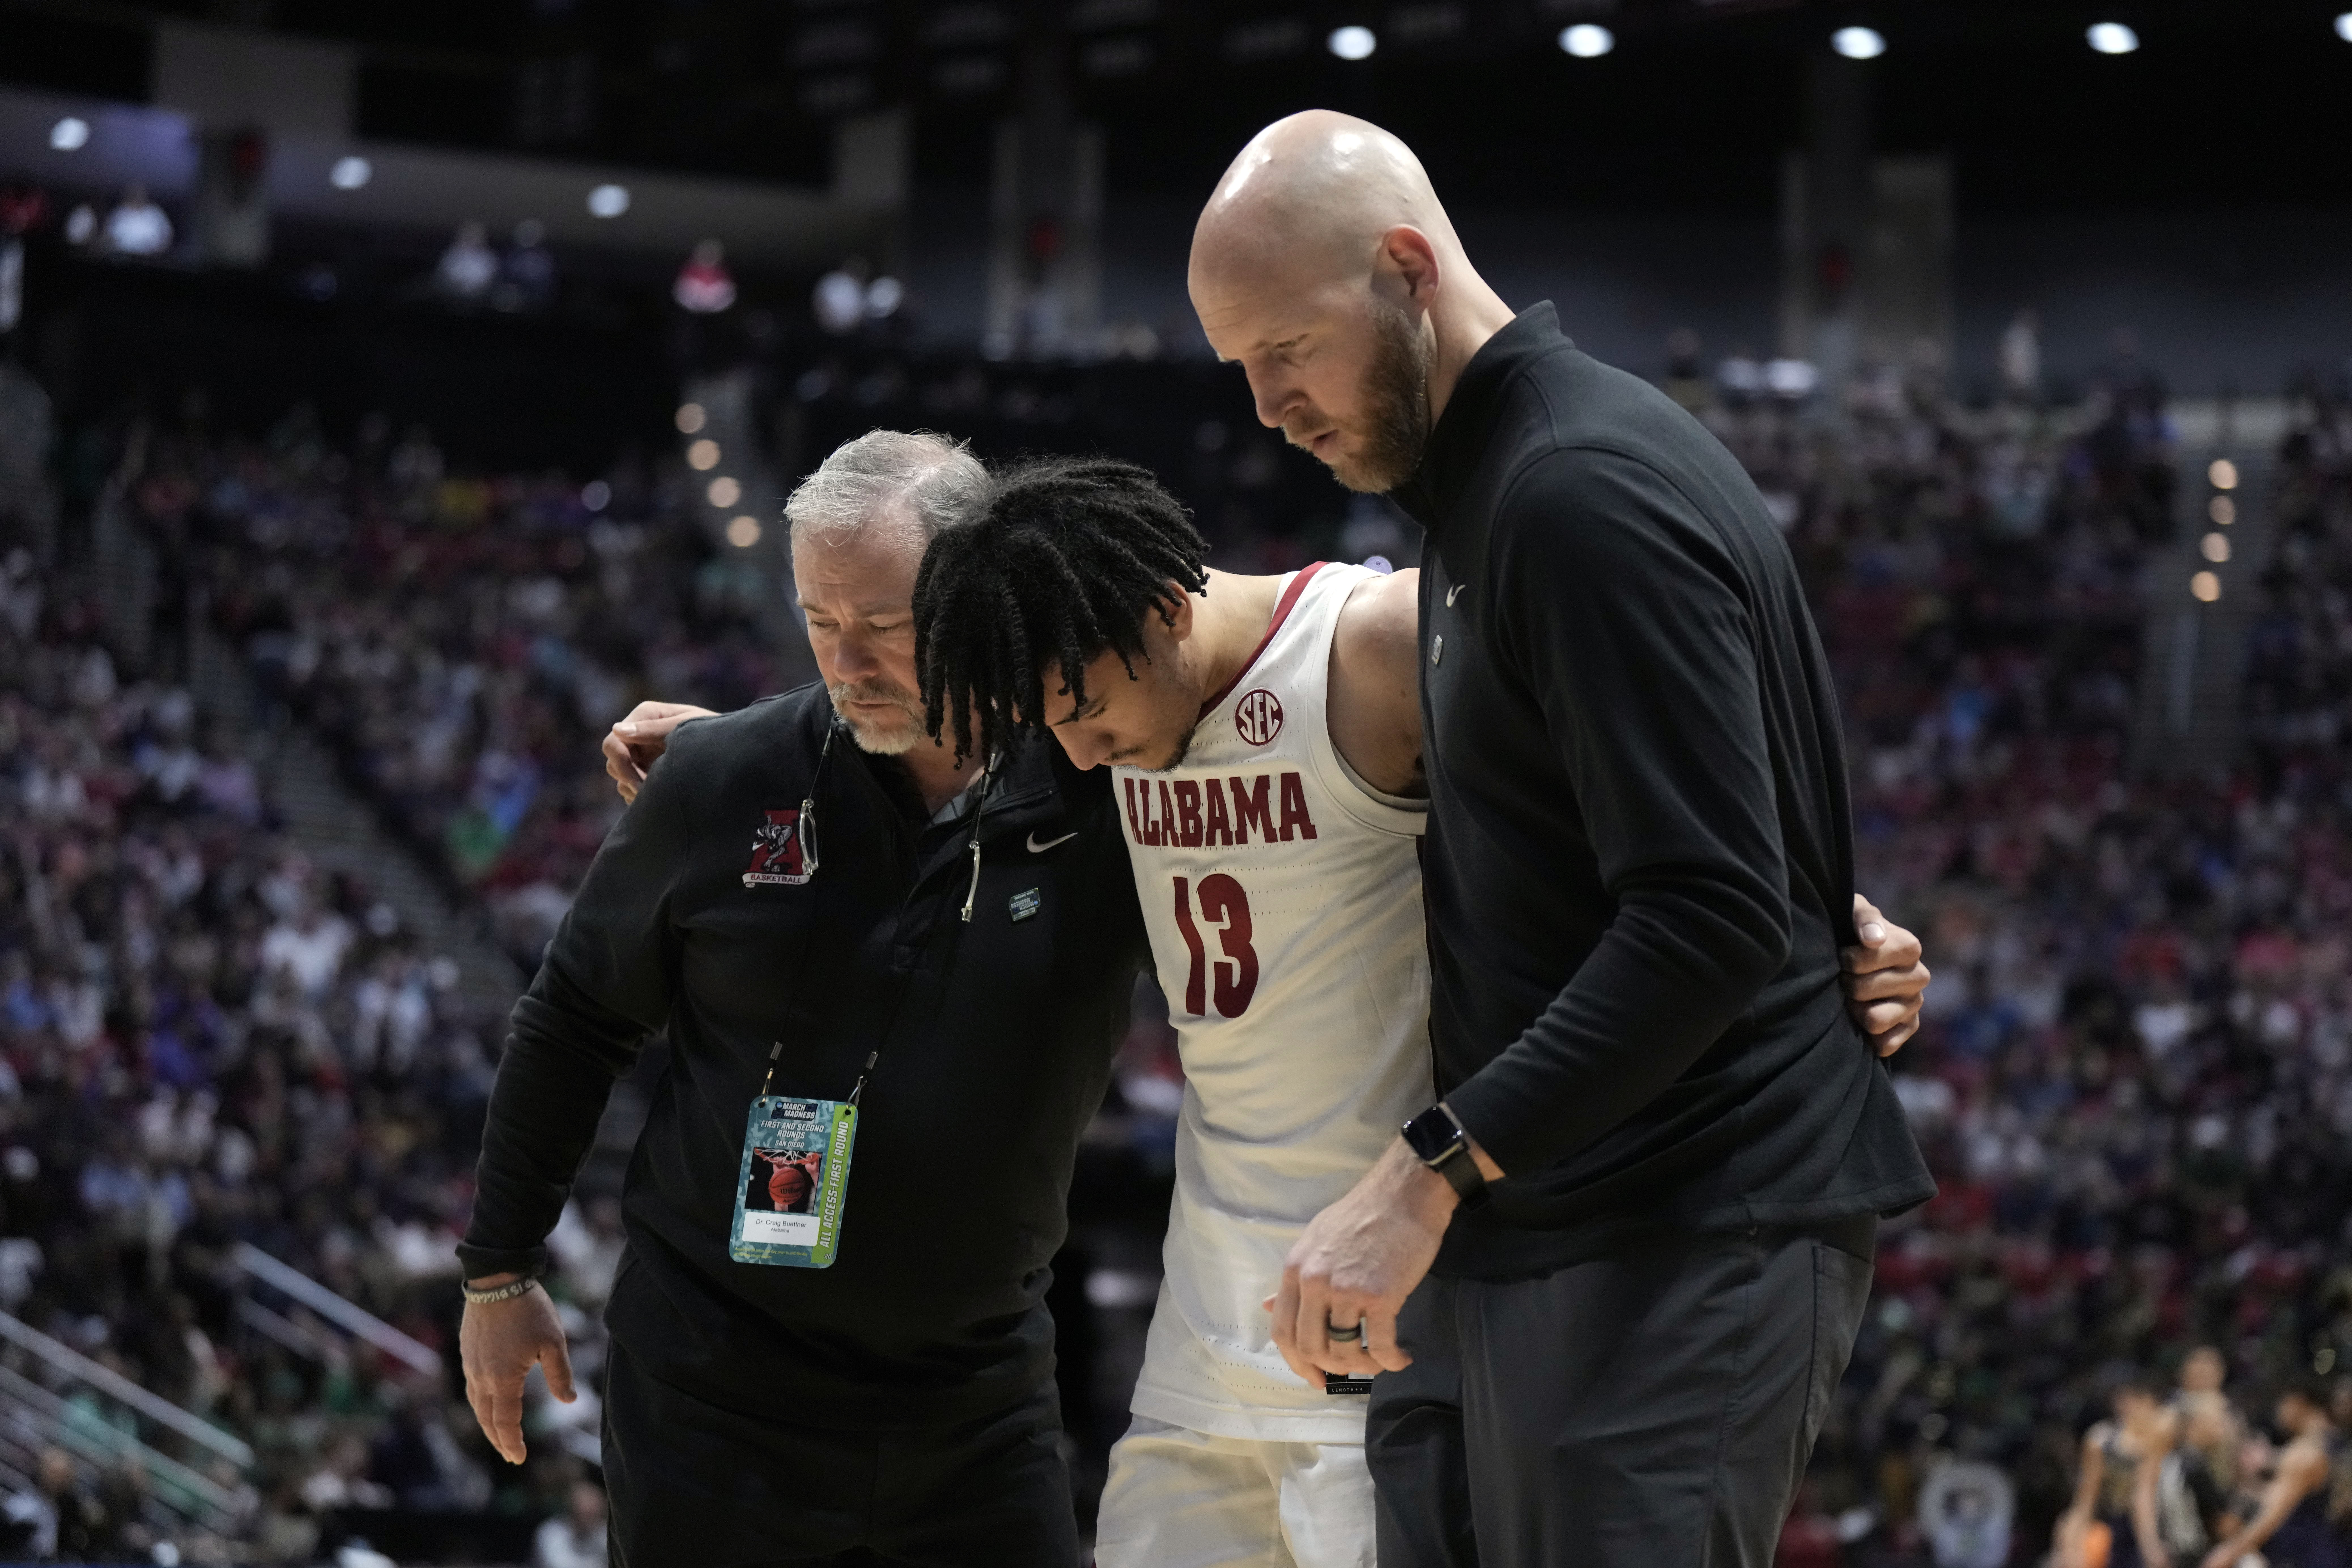 Trainers help Alabama Crimson Tide guard Jahvon Quinerly off the court after an apparent injury in the first half against the Notre Dame Fighting Irish during the first round of the 2022 NCAA Tournament at Viejas Arena.